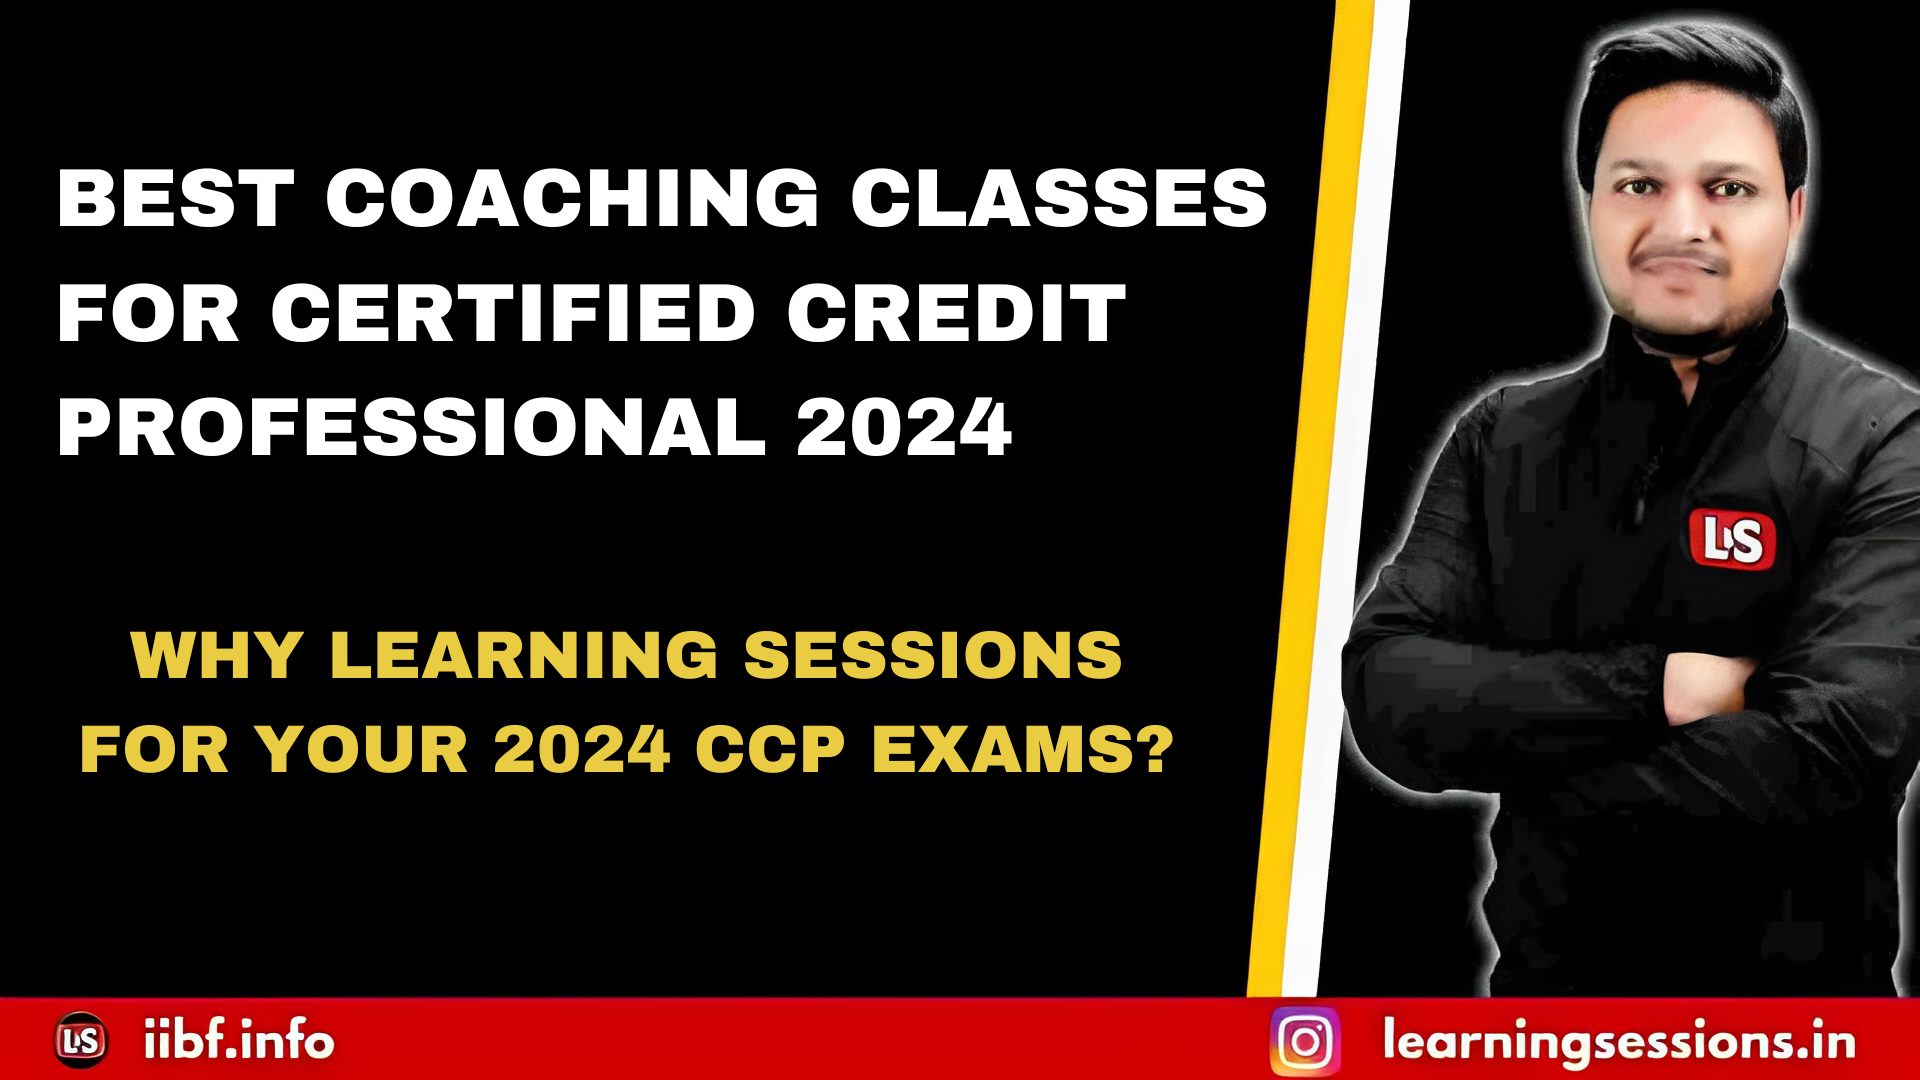 WHY LEARNING SESSIONS FOR YOUR 2024 CCP EXAMS?